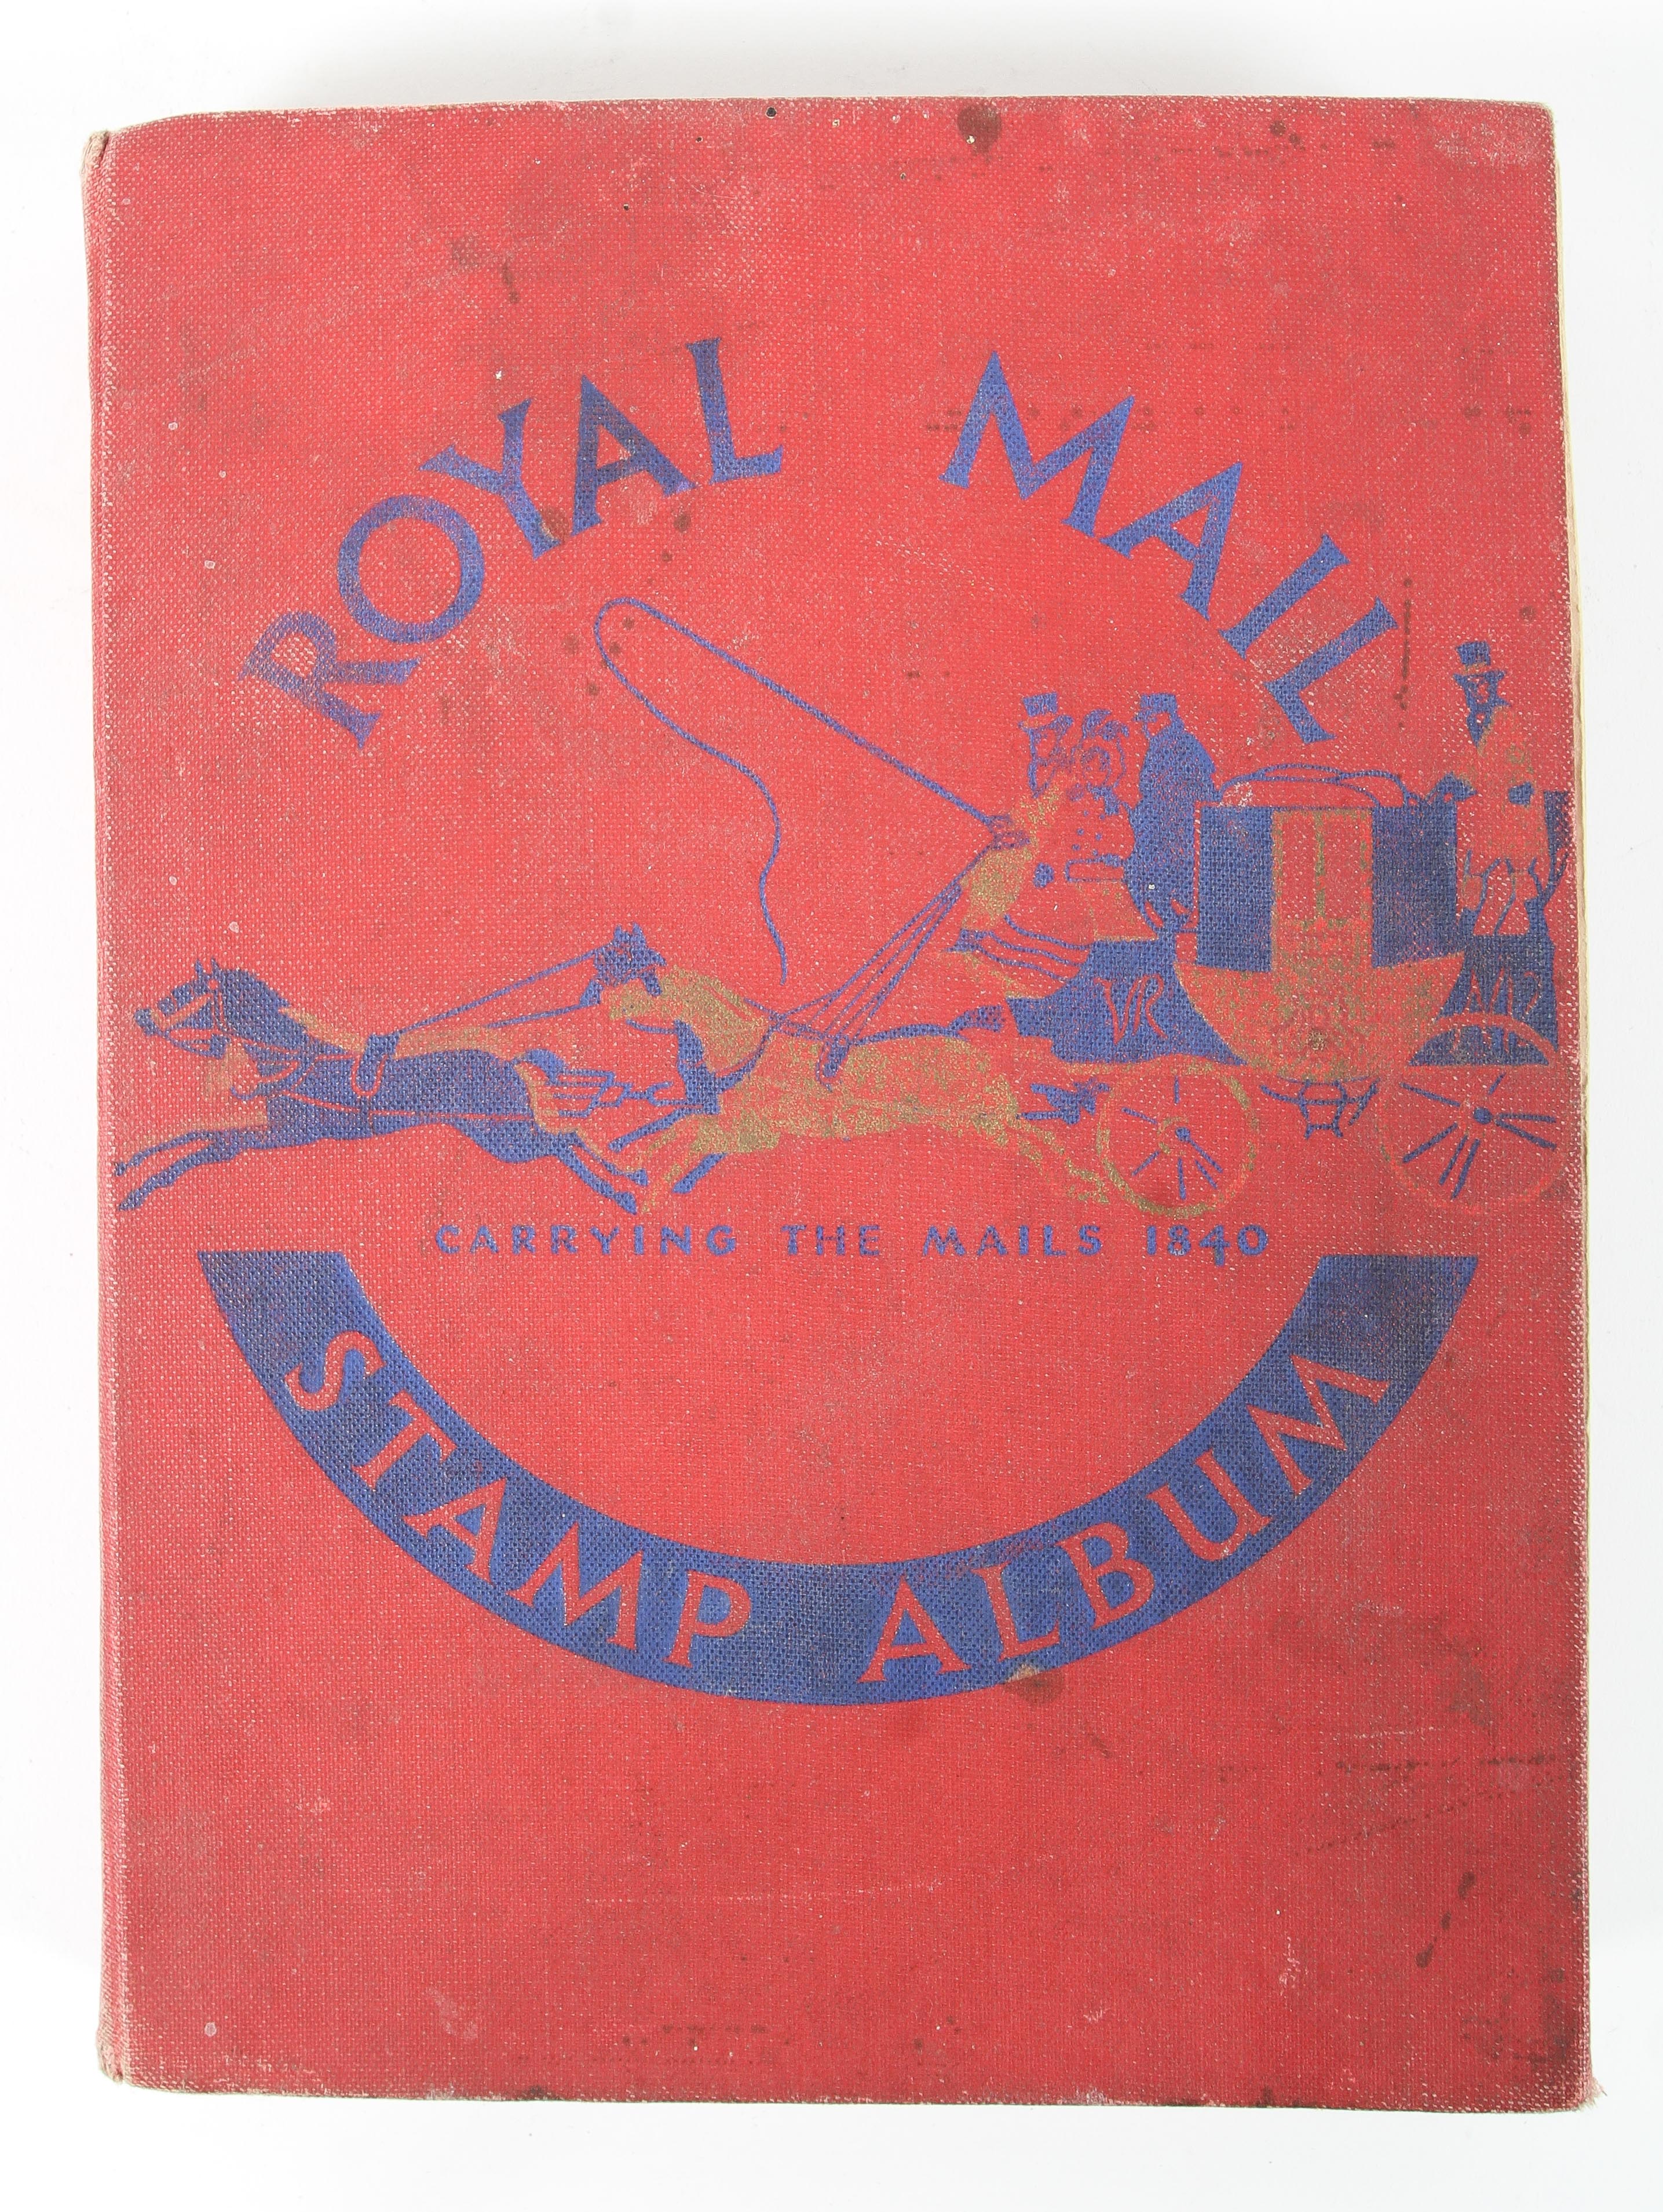 A Royal Mail stamp album containing UK and World stamps. - Image 8 of 8